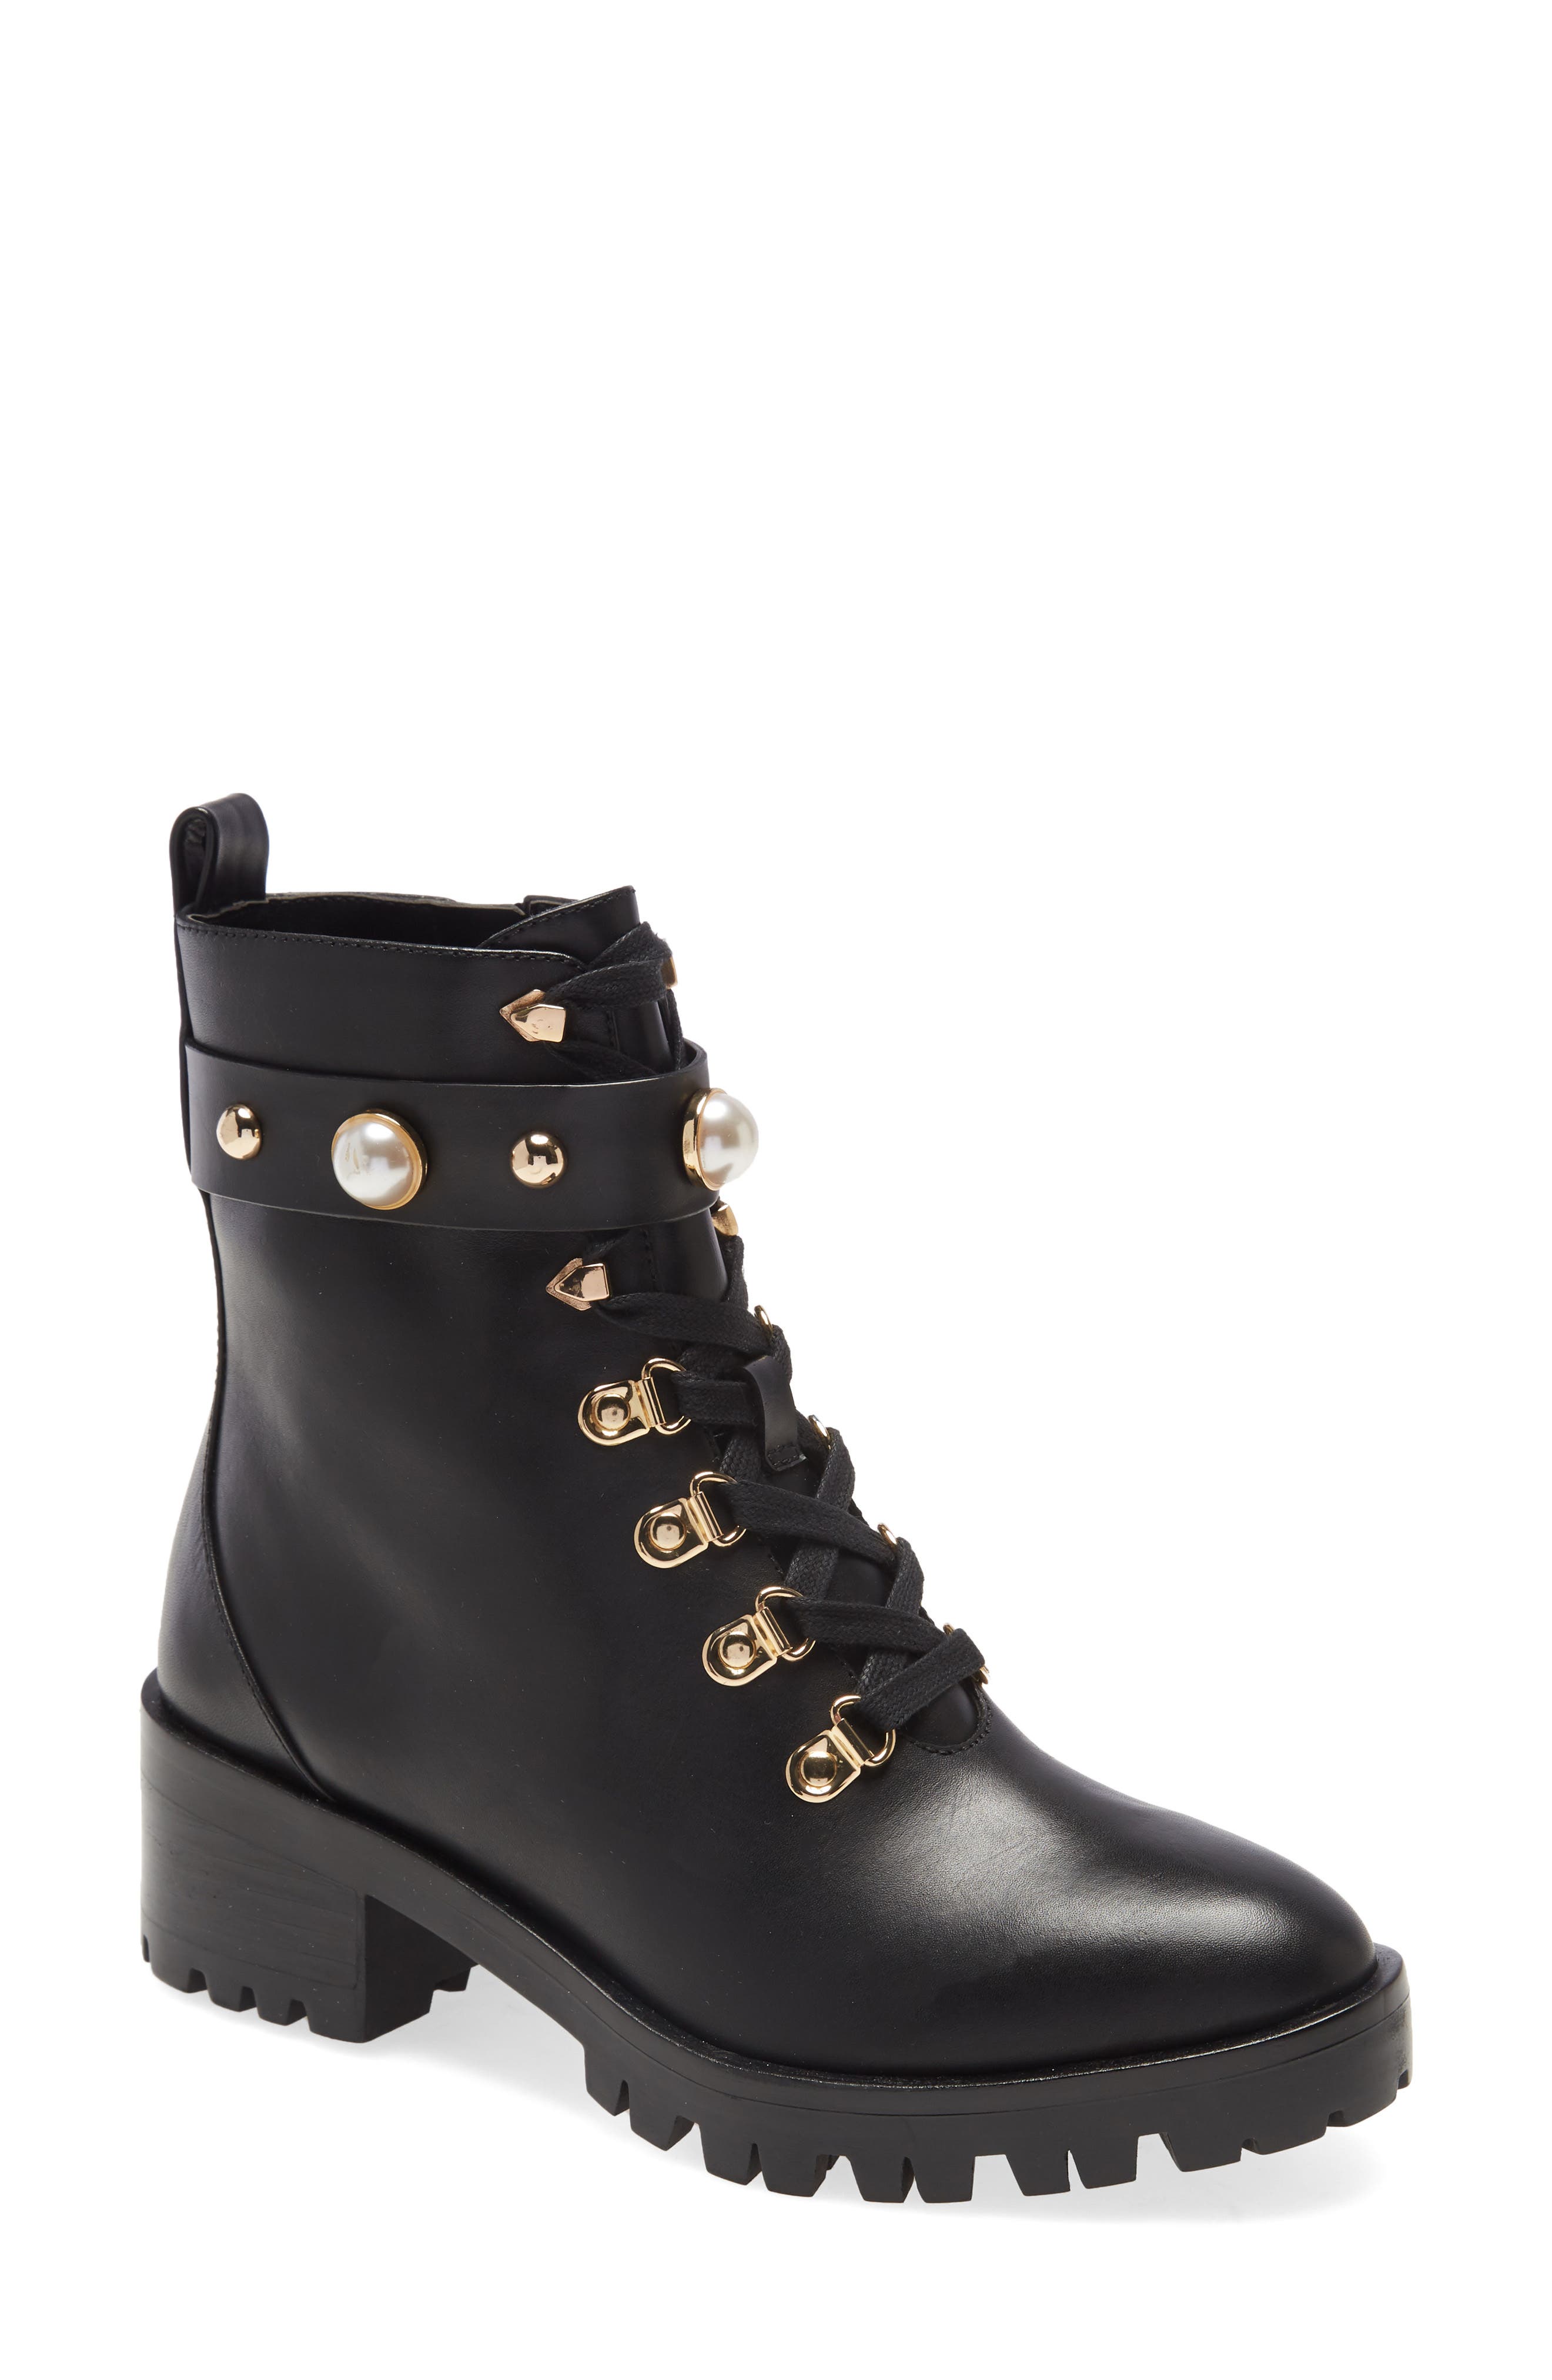 karl lagerfeld boots with pearls